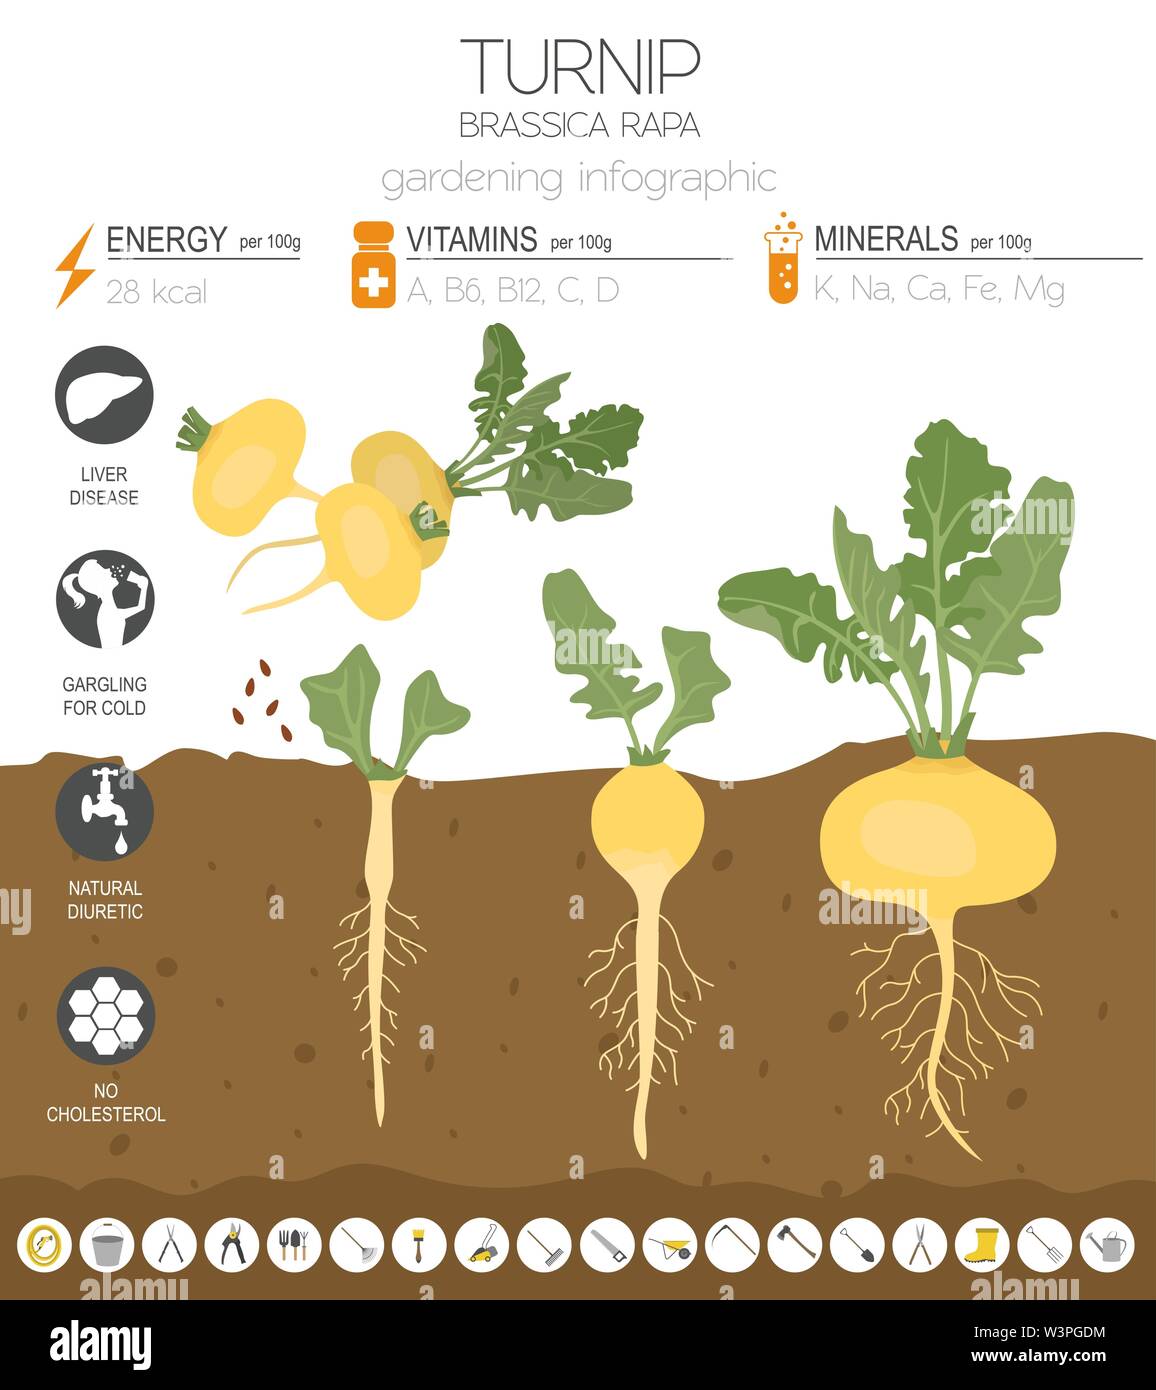 Turnip beneficial features graphic template. Gardening, farming infographic, how it grows. Flat style design. Vector illustration Stock Vector